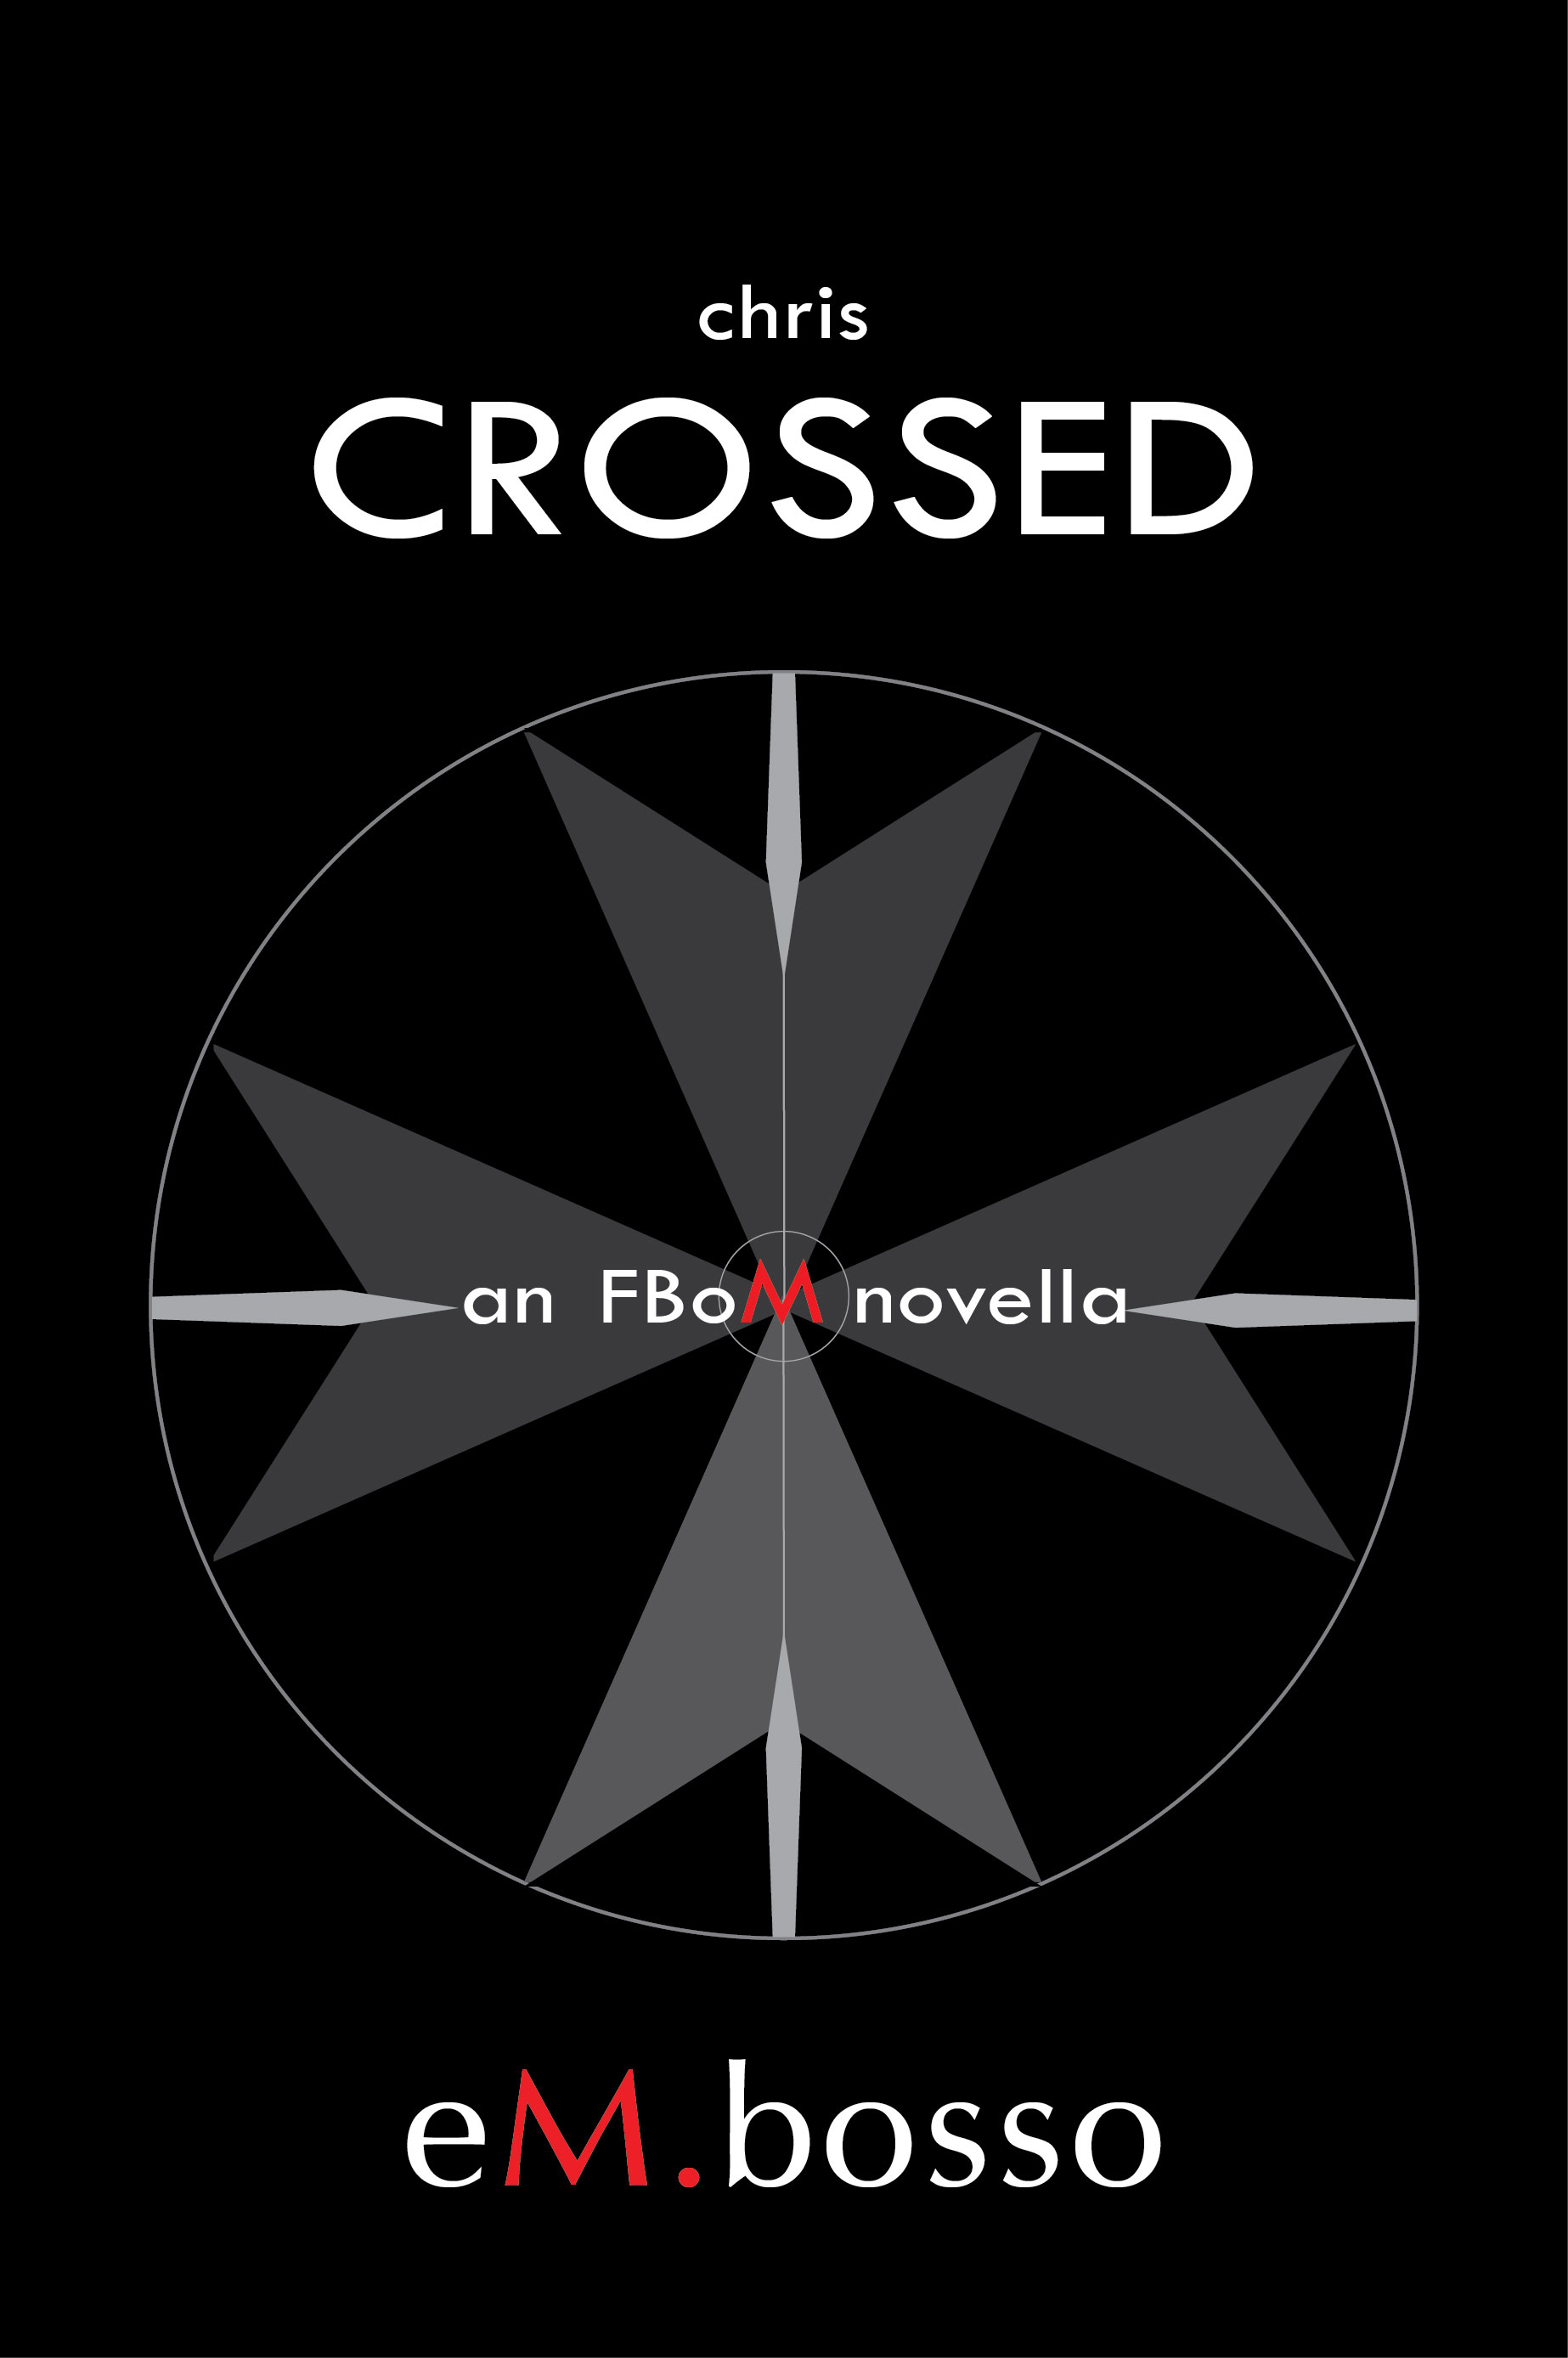 Black and gray image of the cover to Chris Crossed - An FBoM Novella which explores the conditions which may create a sociopath.